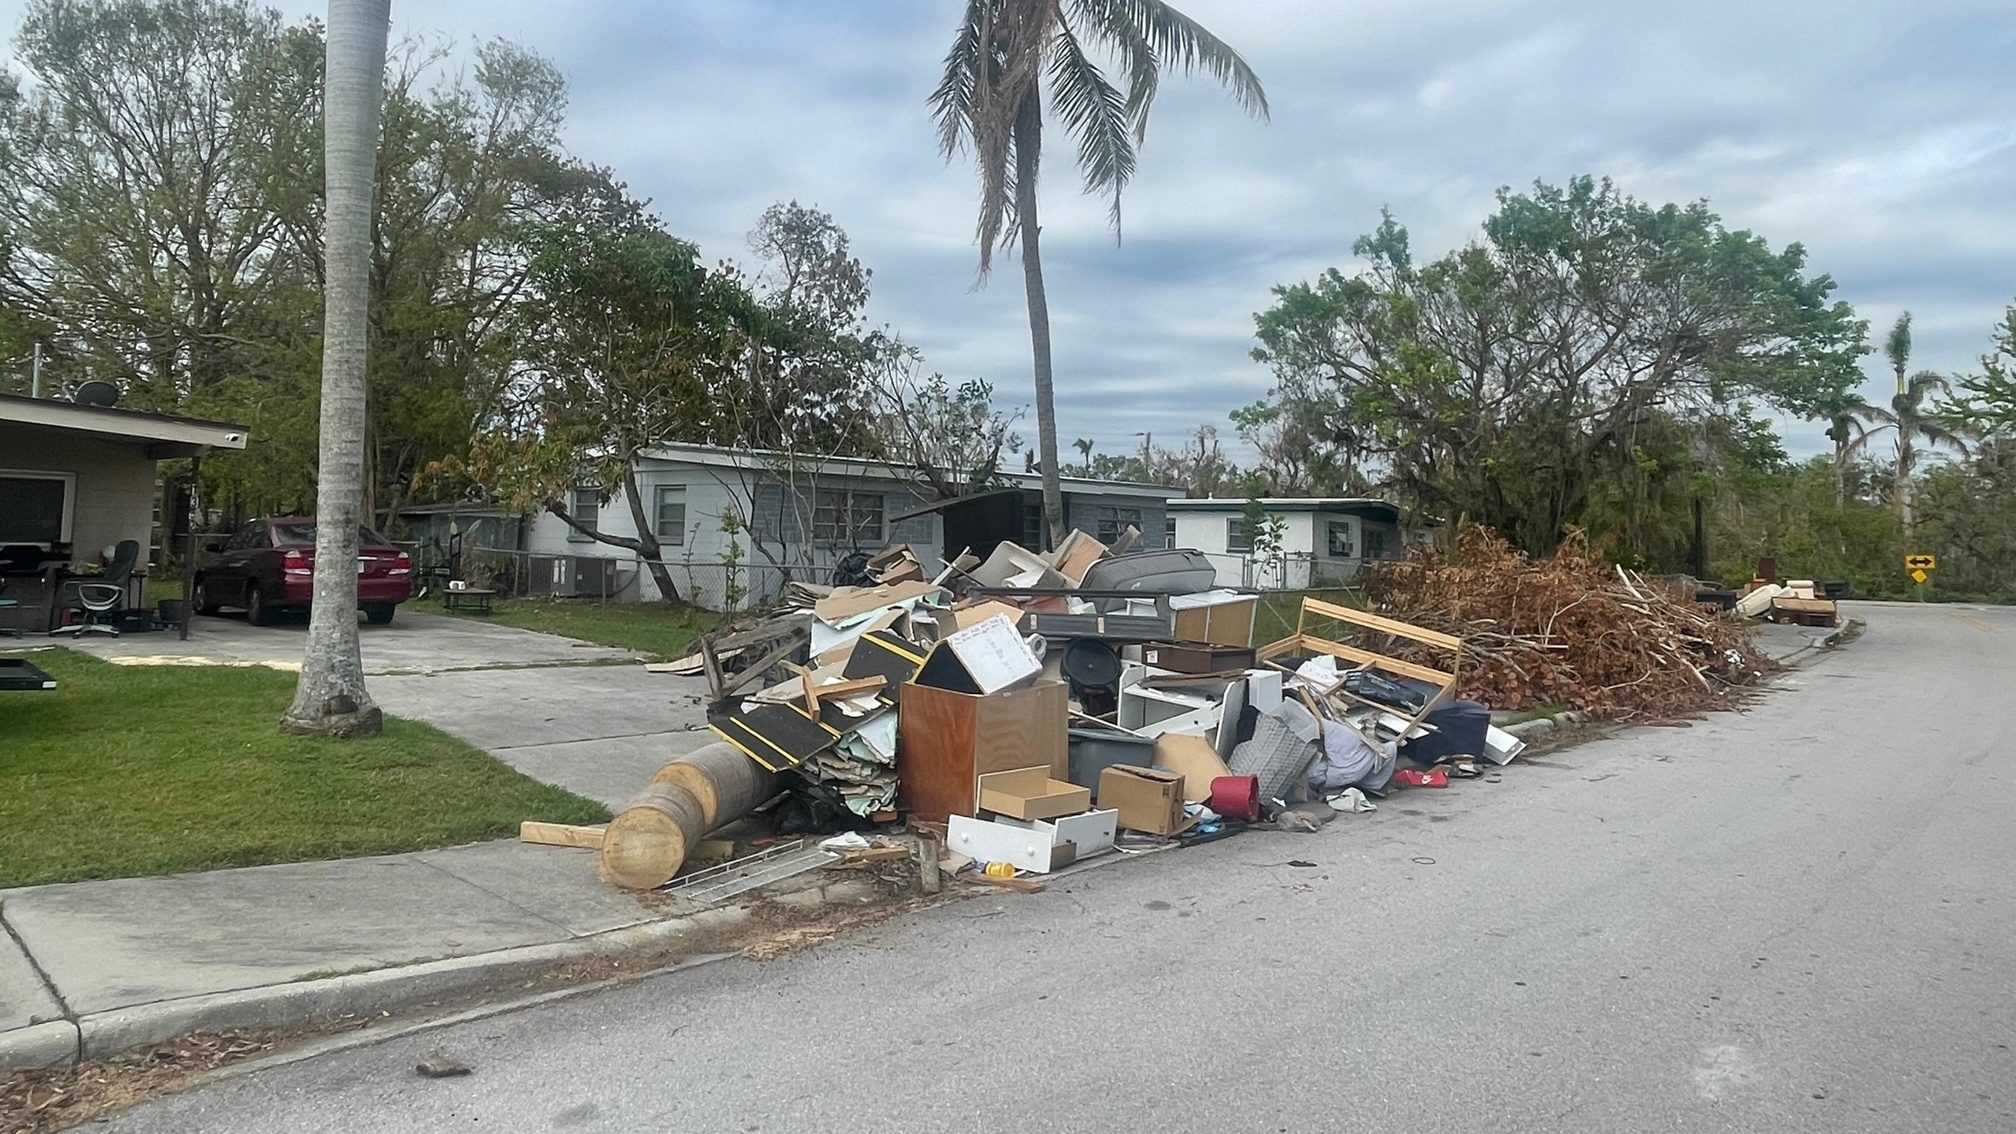 https://www.marketplace.org/wp-content/uploads/2022/11/fort-myers-street-homes-with-debris-e1669153142295.jpg?fit=2016%2C1134